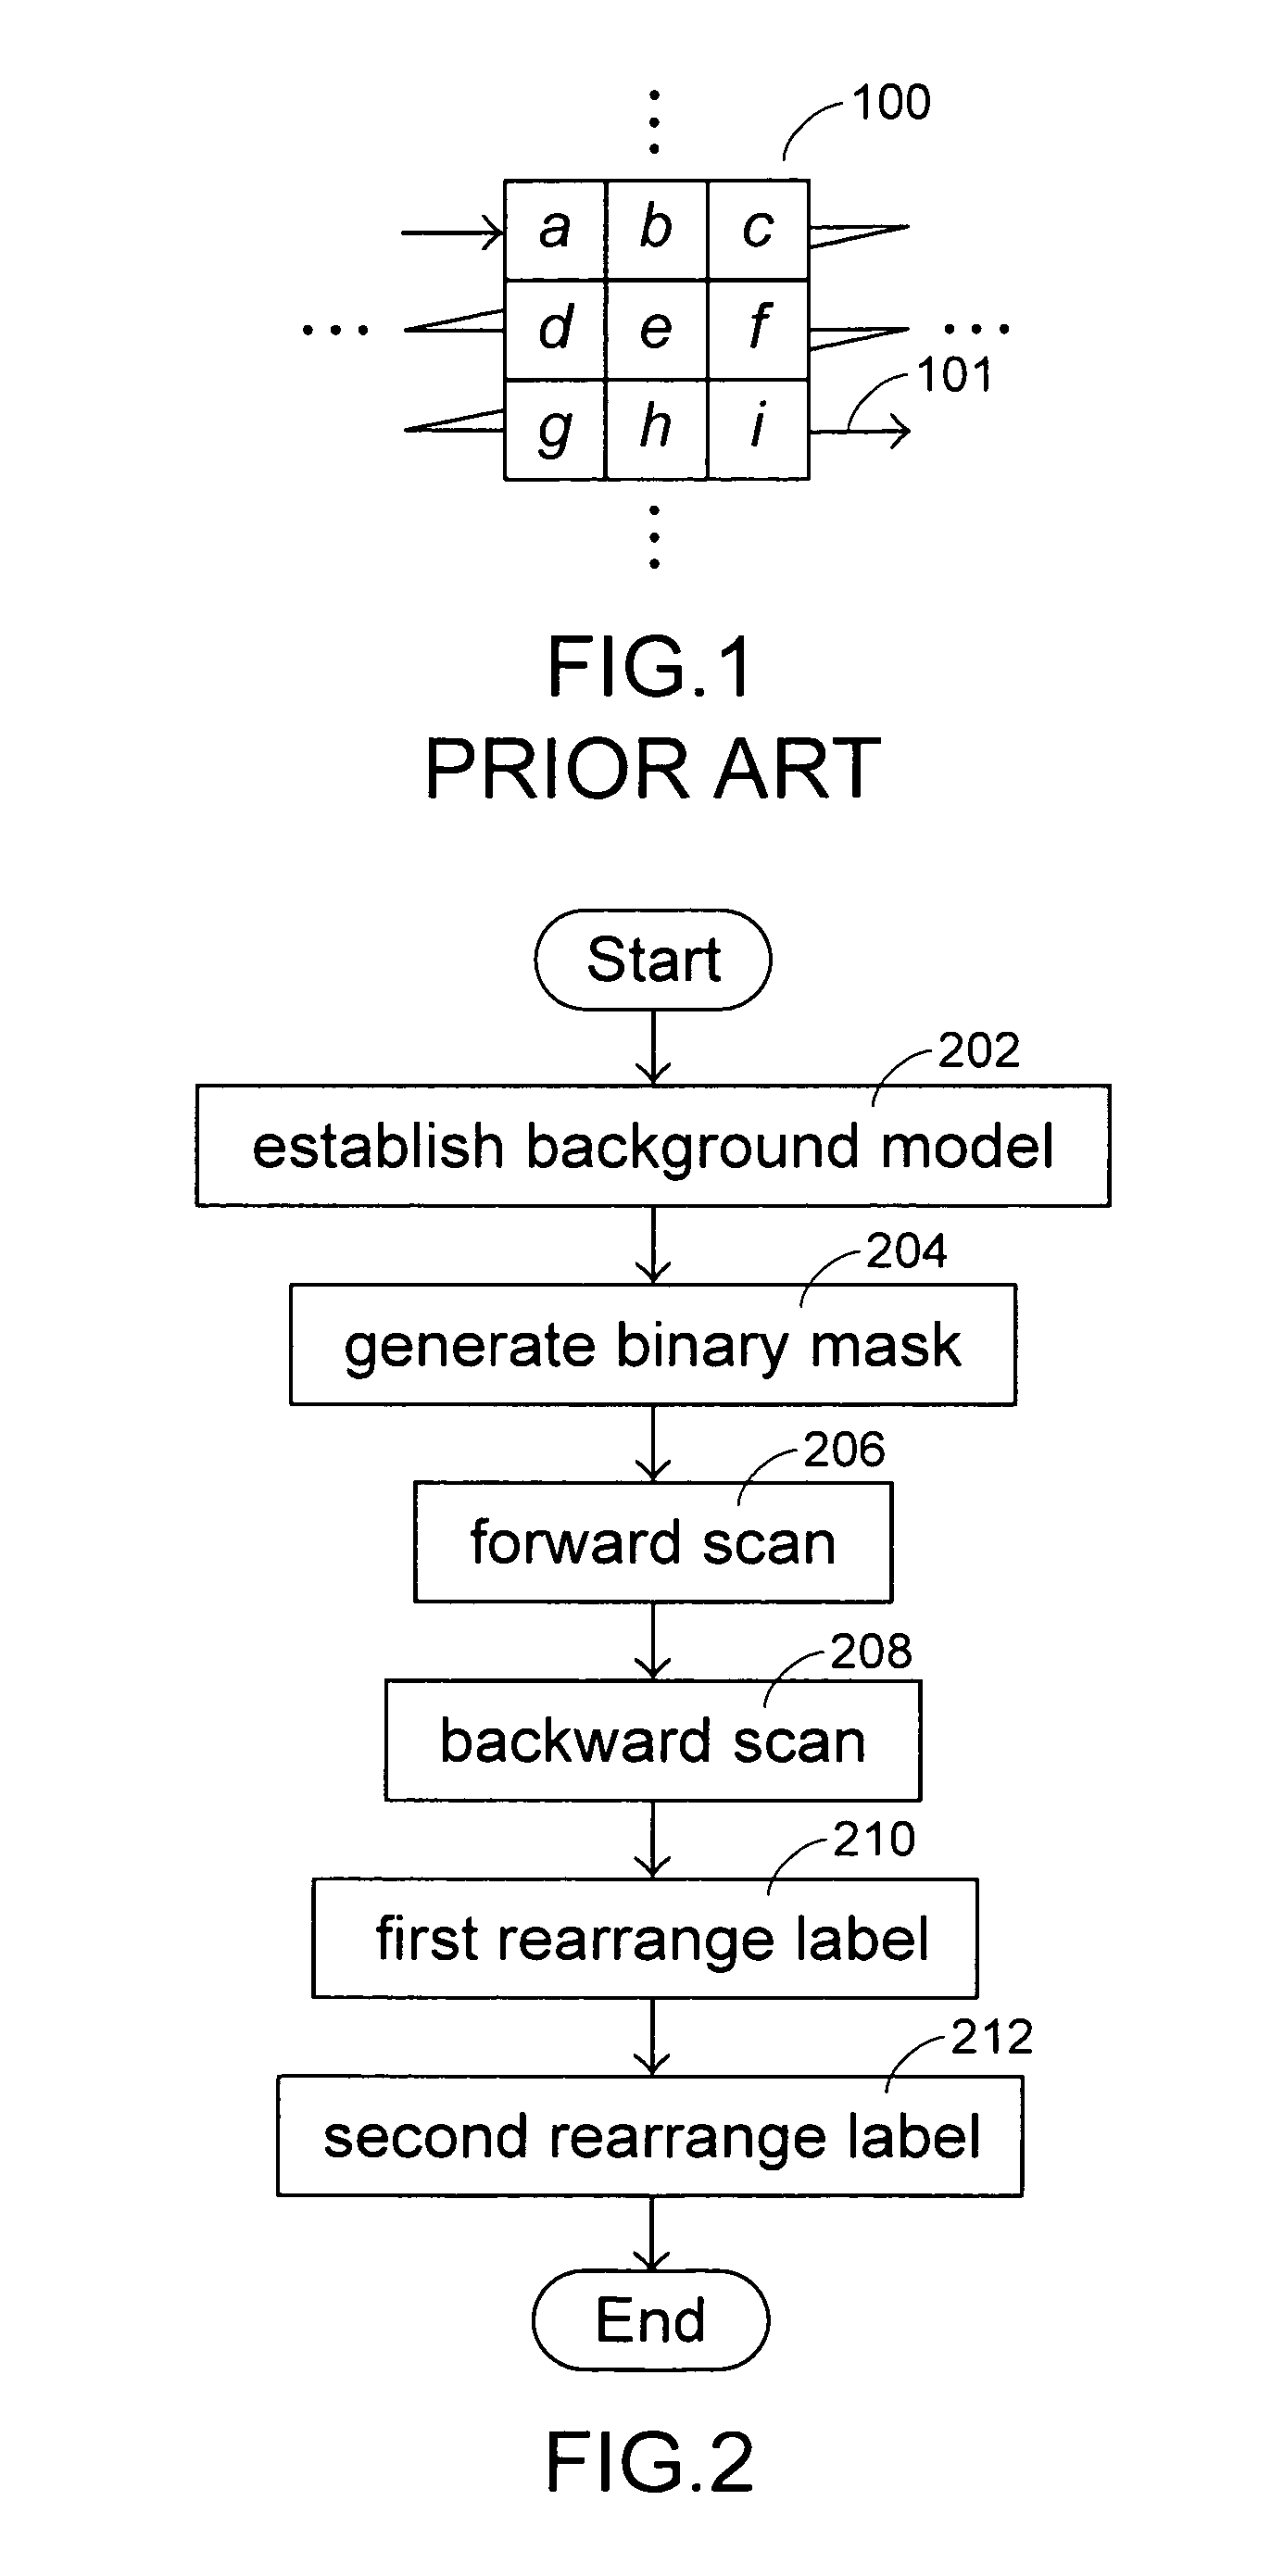 Image analysis using a hybrid connected component labeling process